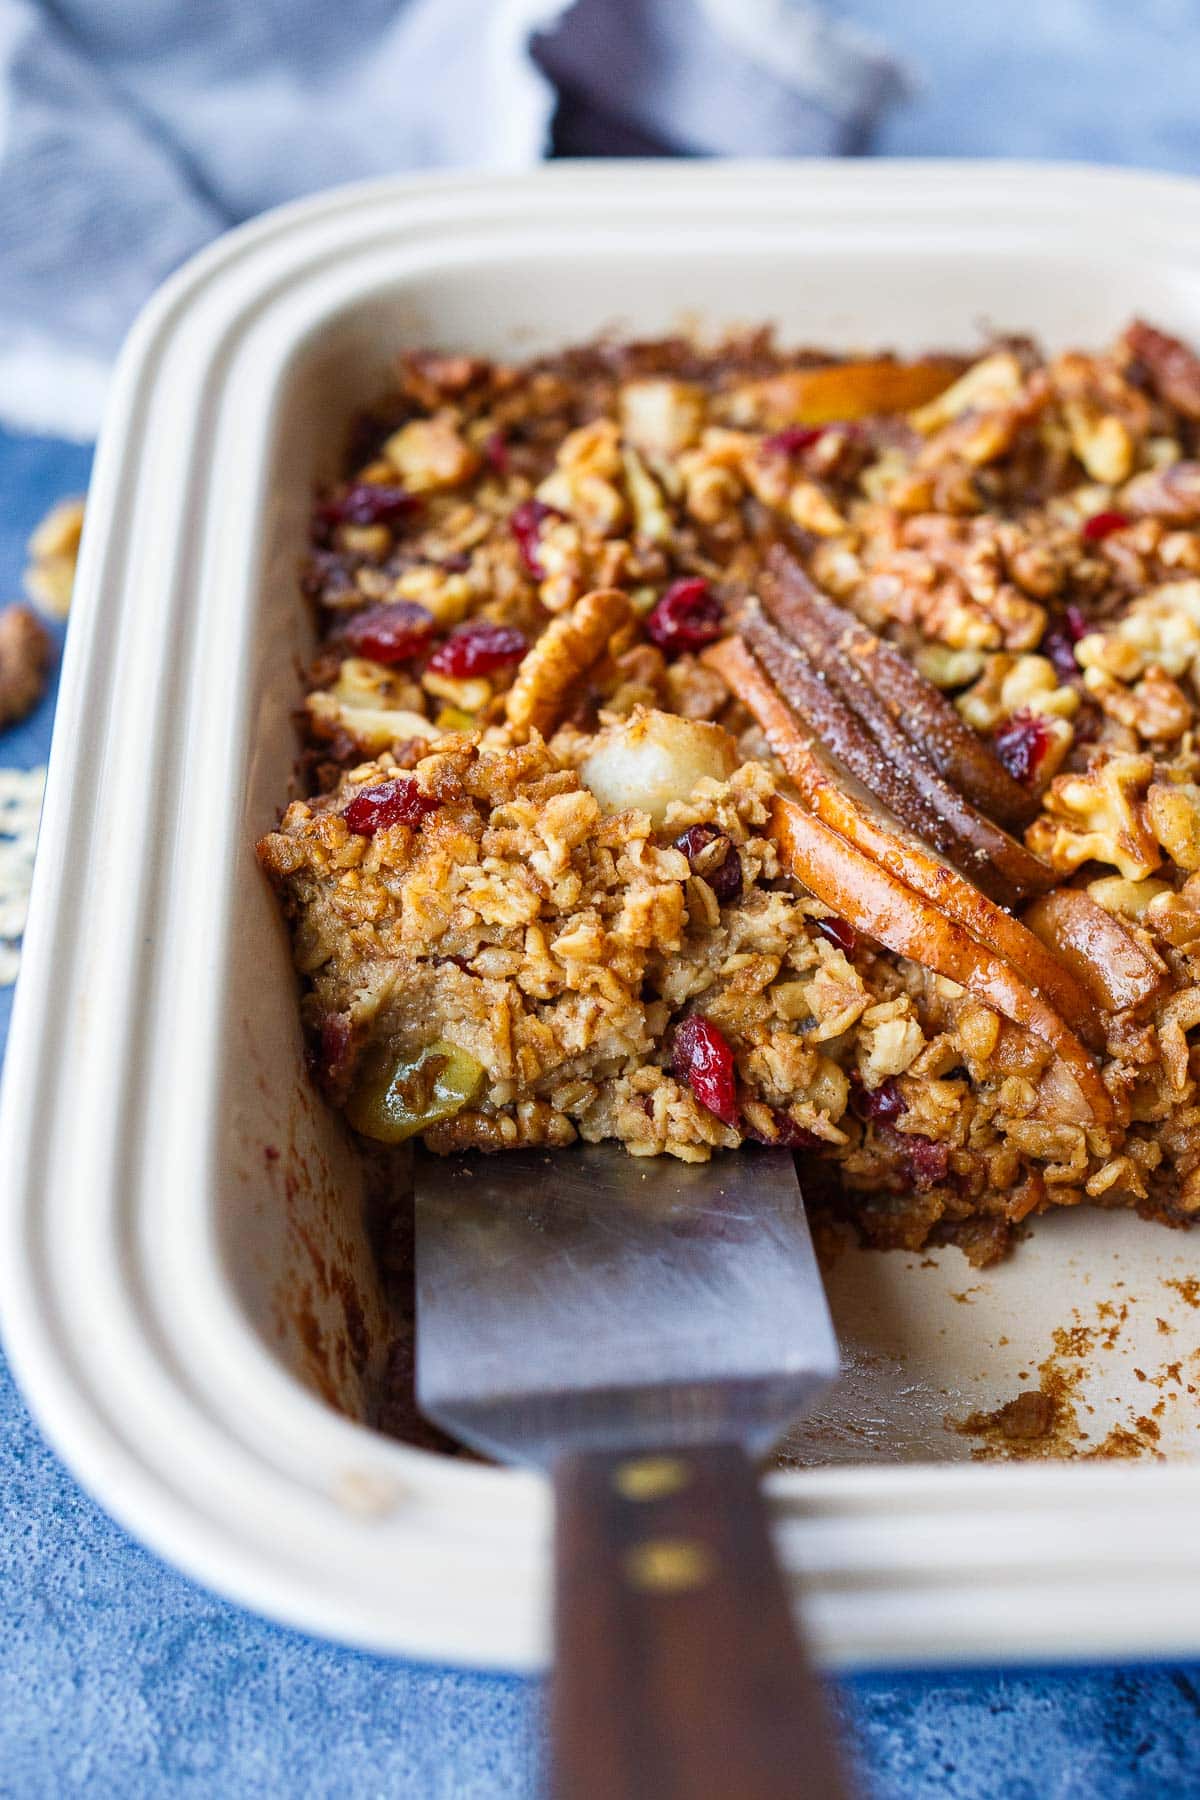 baked oatmeal in baking dish with spatula scooping out a piece